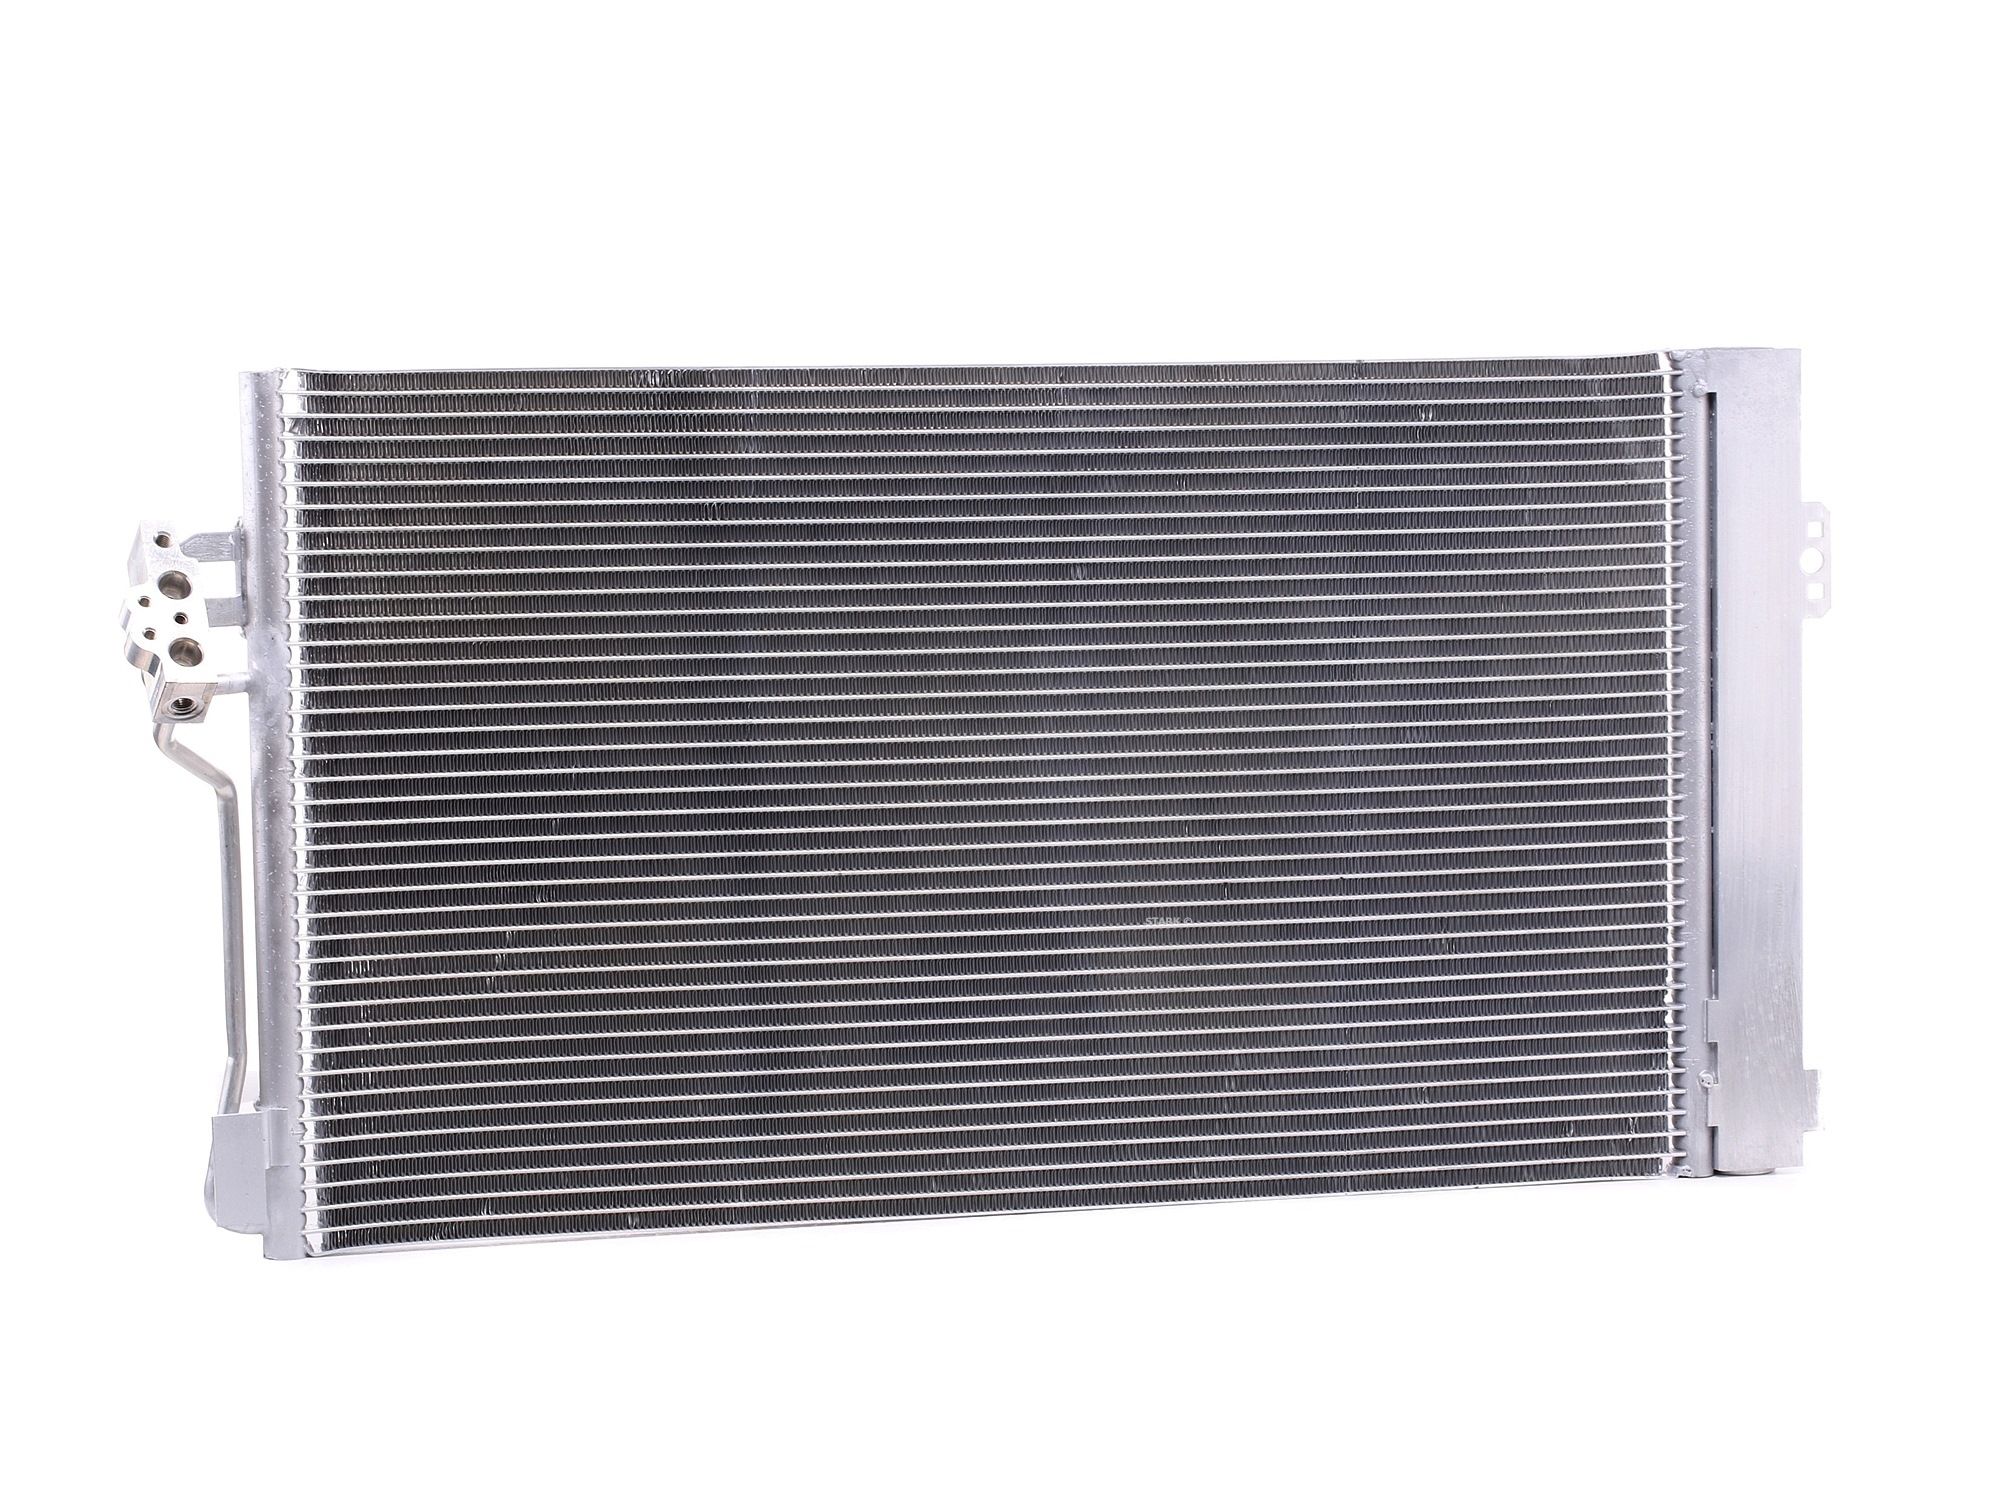 STARK SKCD-0110335 Air conditioning condenser with dryer, 708 x 368 x 16 mm, 13,8mm, 13,8mm, Aluminium